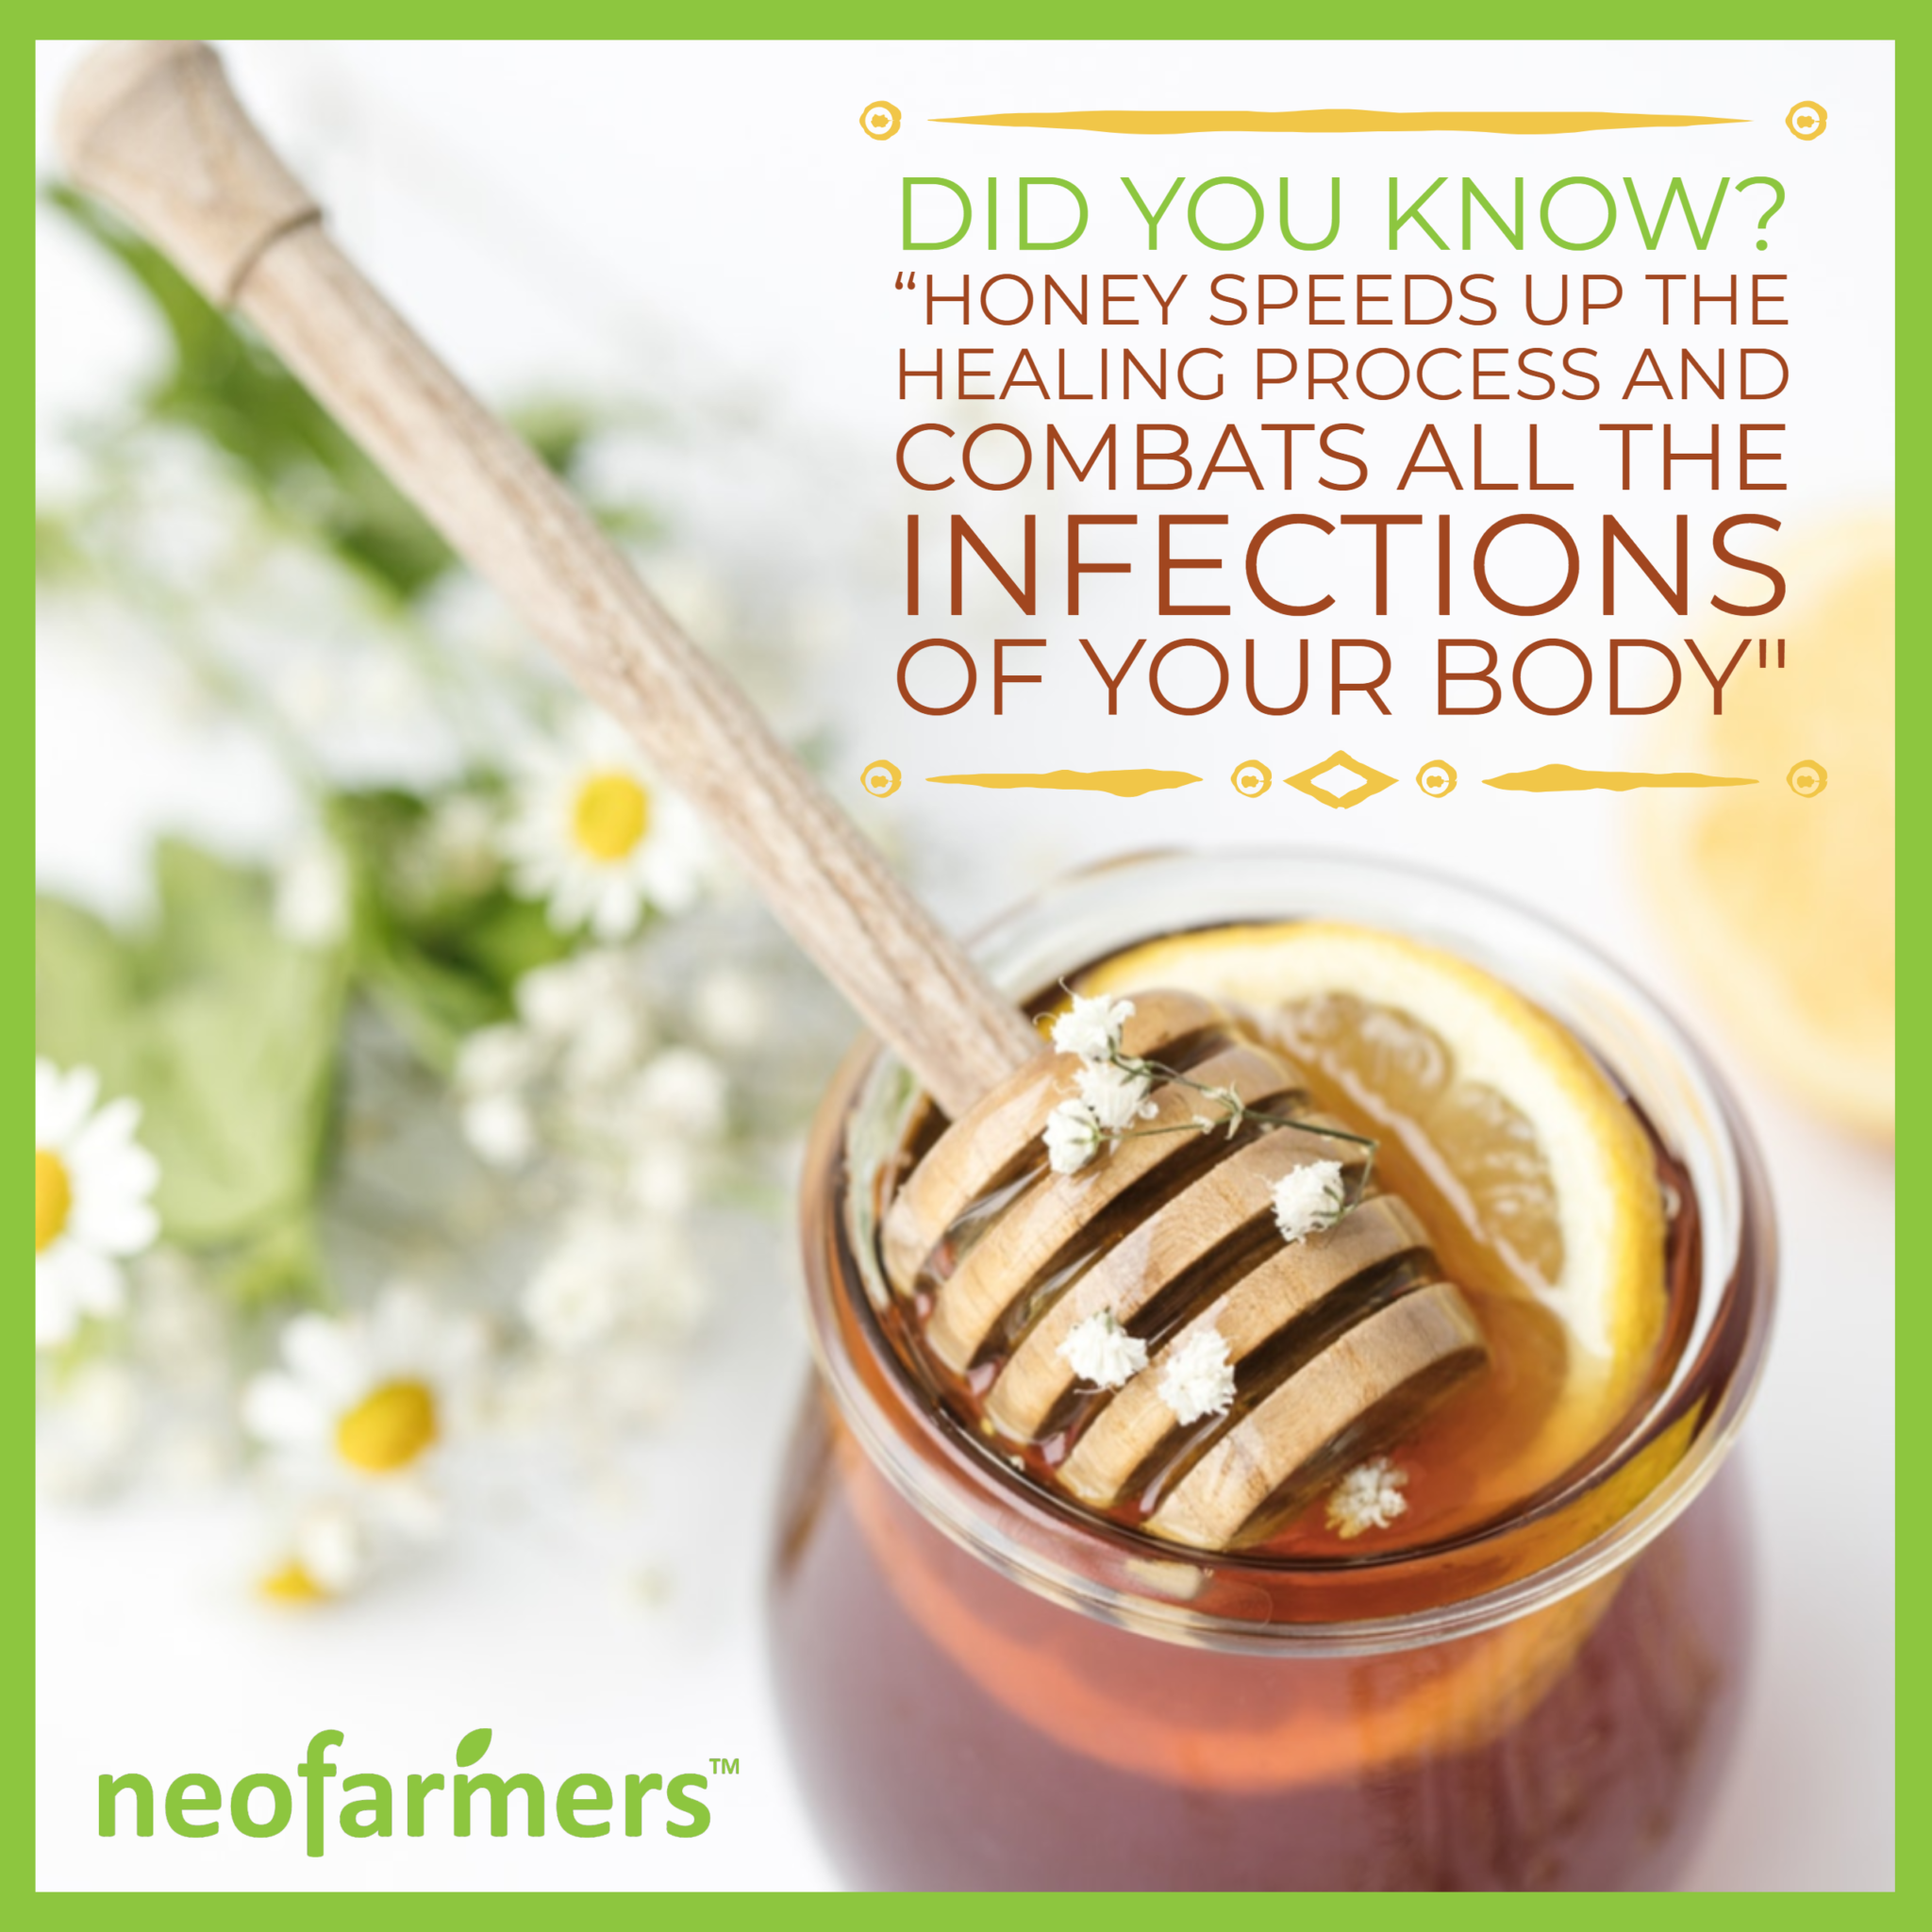 Amazing facts about Honey!